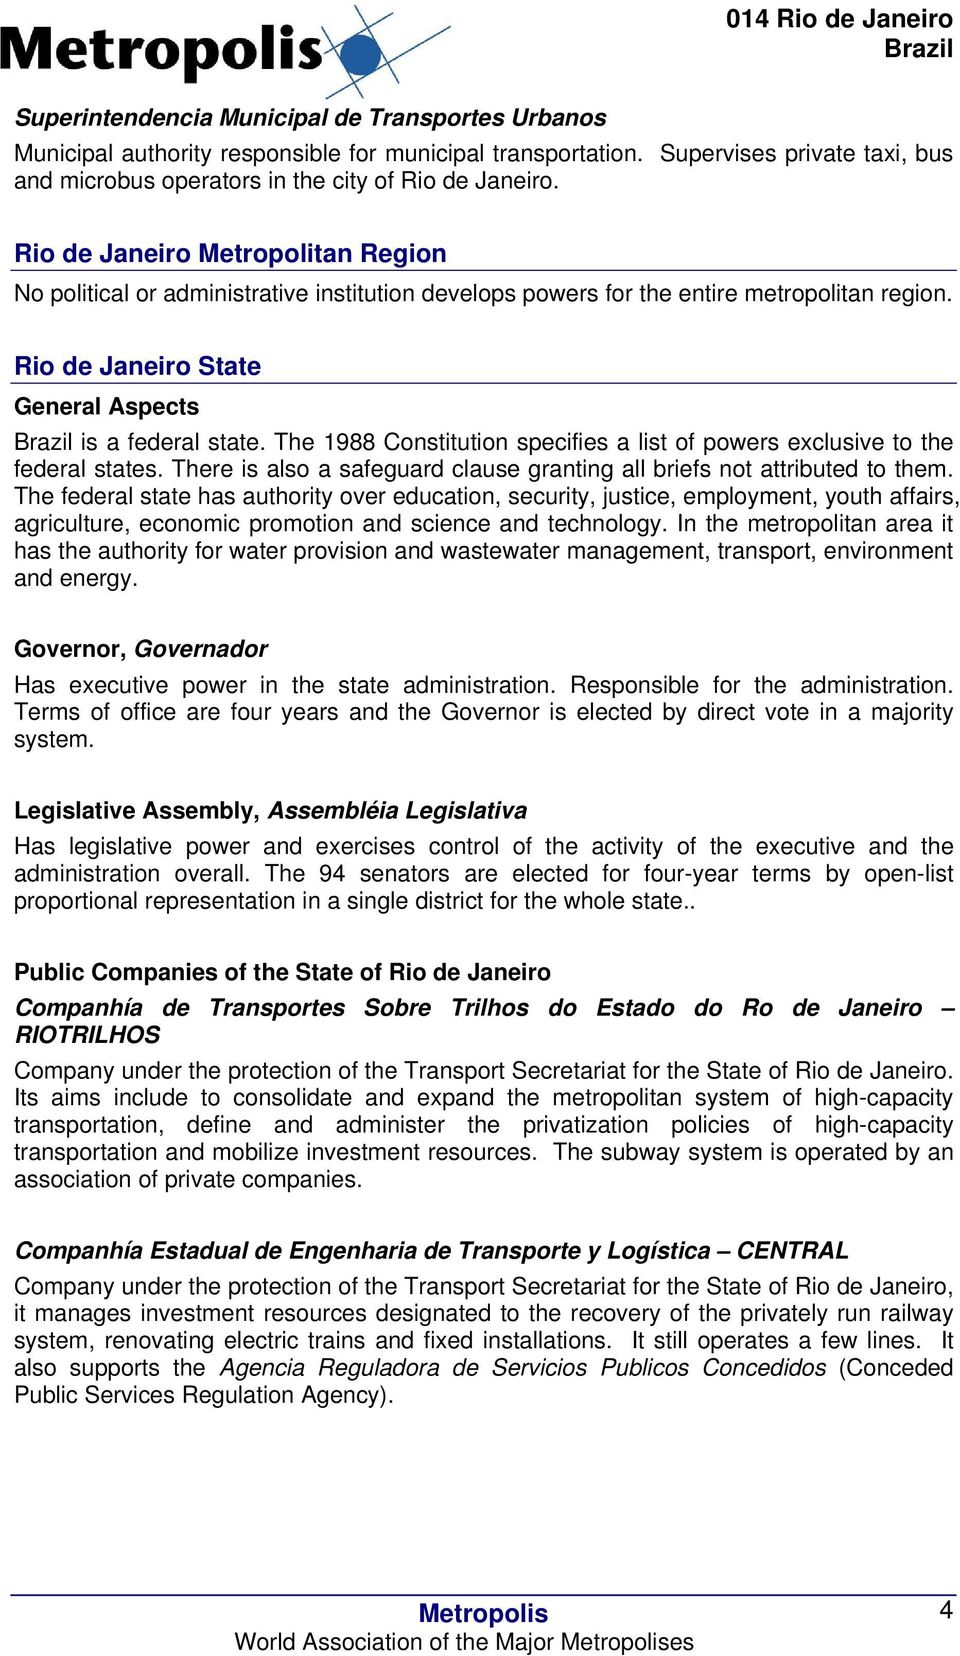 The 1988 Constitution specifies a list of powers exclusive to the federal states. There is also a safeguard clause granting all briefs not attributed to them.